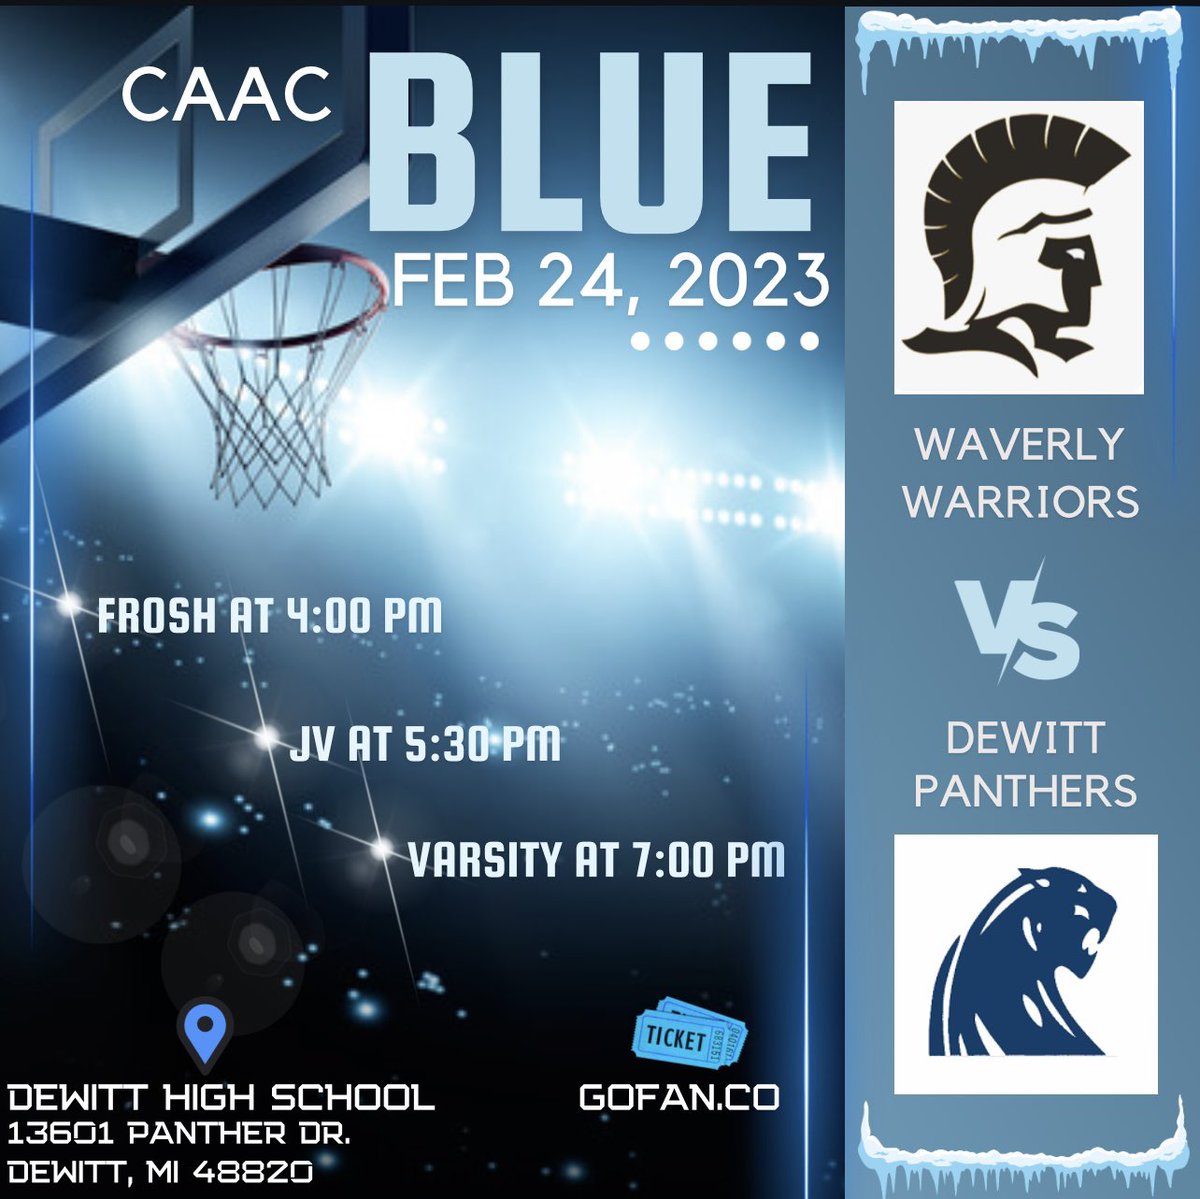 This is guaranteed to be a good one, so get there early. 
Varsity looks to take sole possession of the #1 CAAC Blue on Dewitt’s Senior Night 
YOU DONT WANT TO MISS THIS 🥶 @AudreyDahlgren @ian_kress @LSJsports @kellanbuddy @brian_calloway @jgilbertsport @scoopIPS @WILXSports